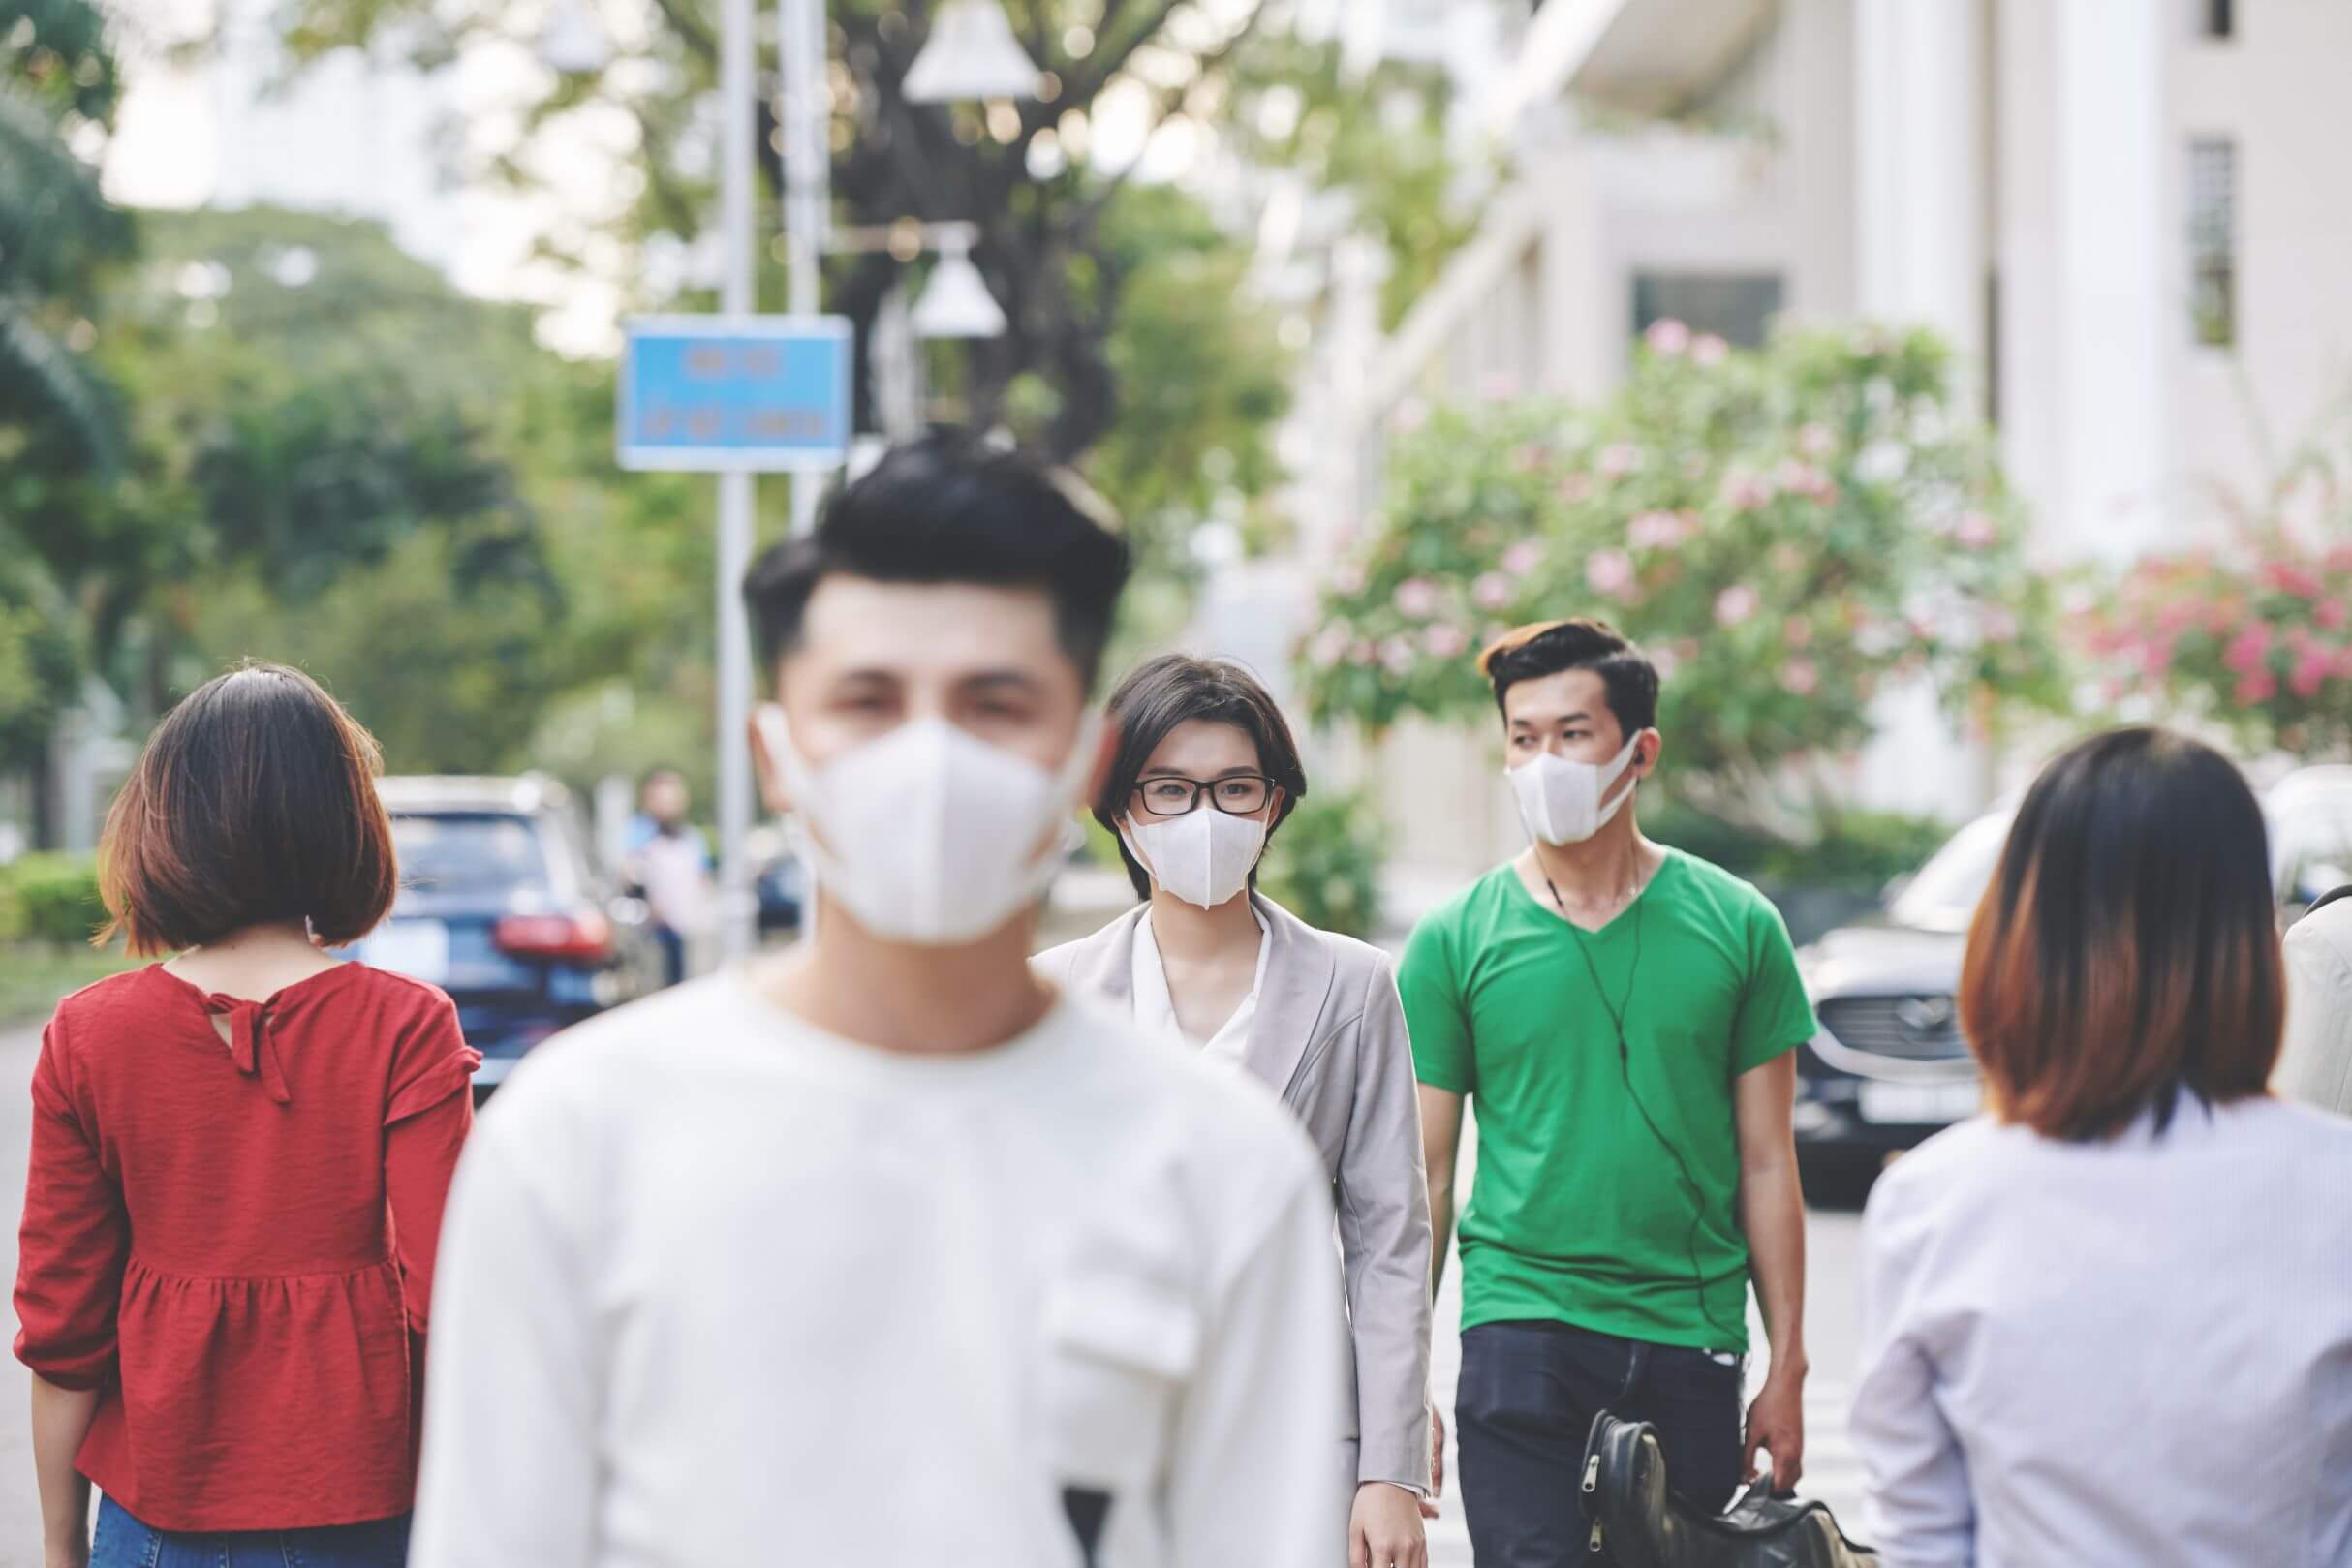 Group of people wearing Covid 19 masks.